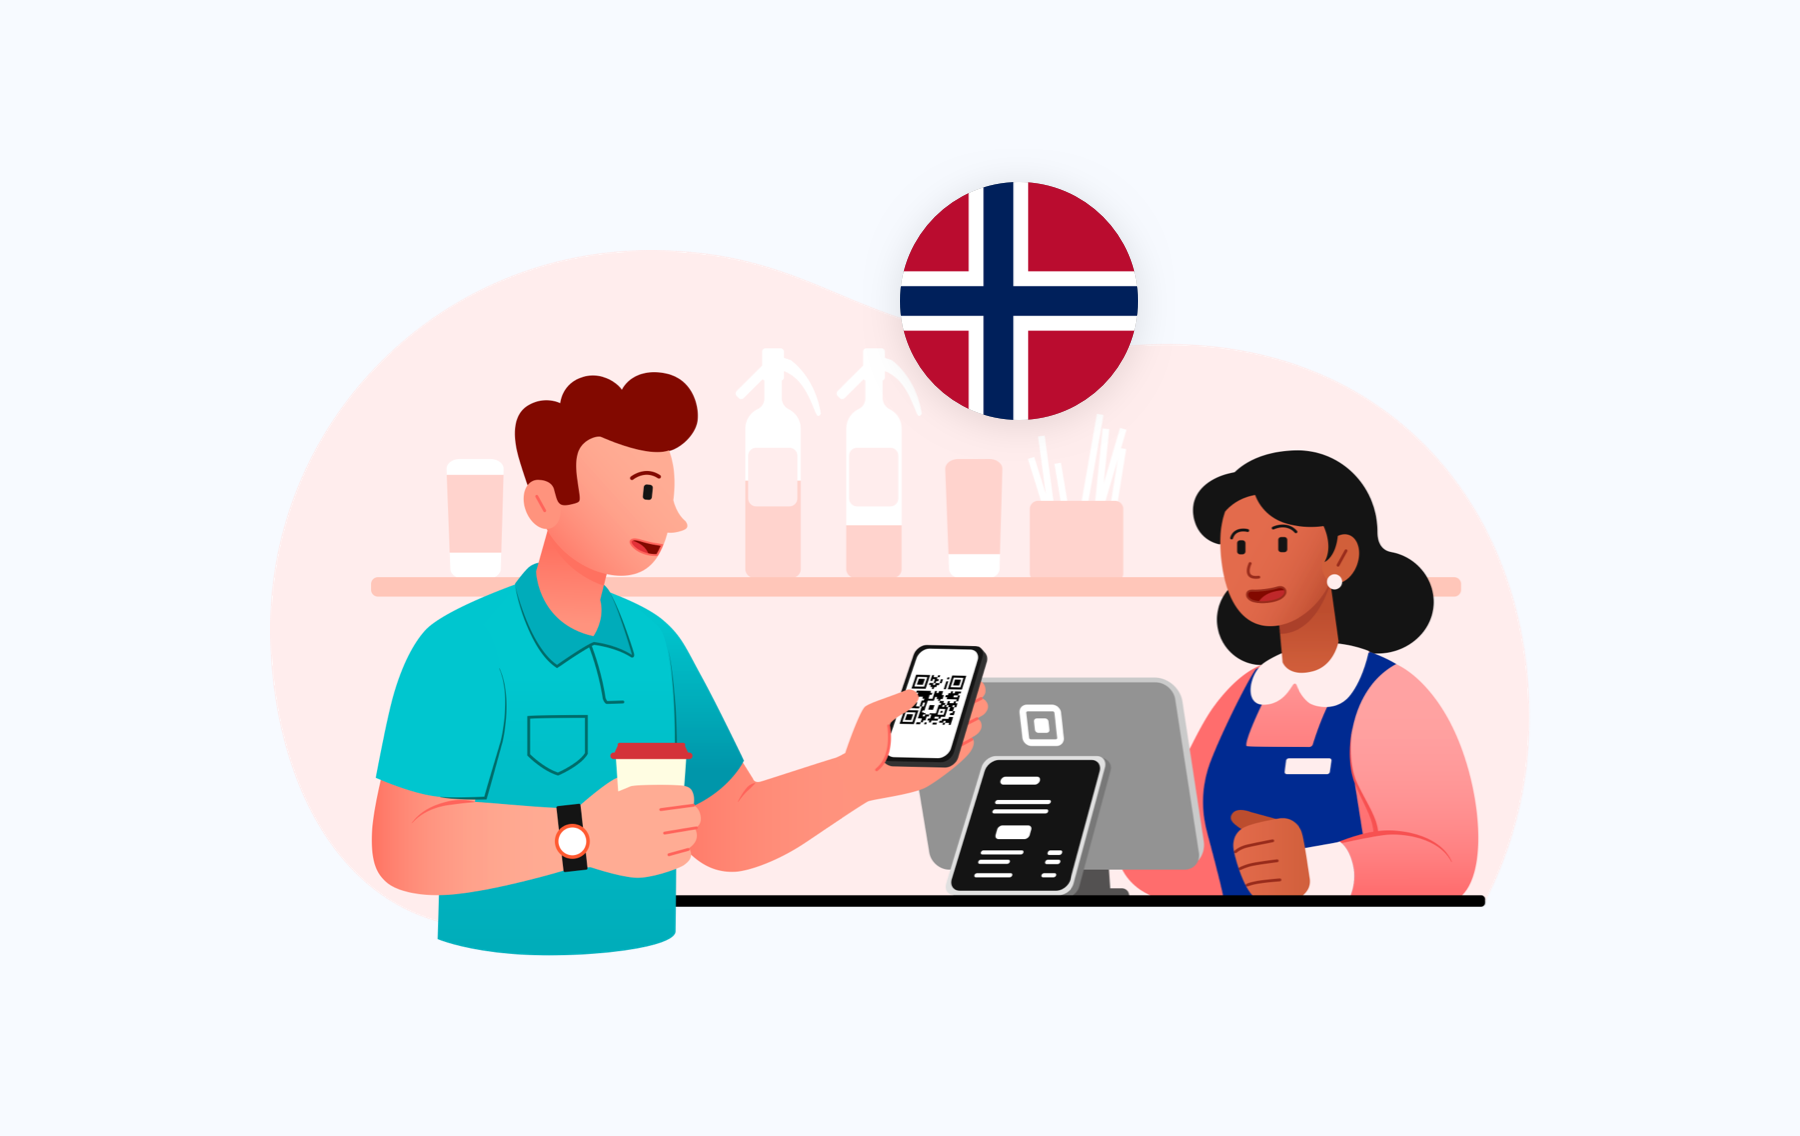 Norway's Latest Cashless Move: Testing a Digital Currency